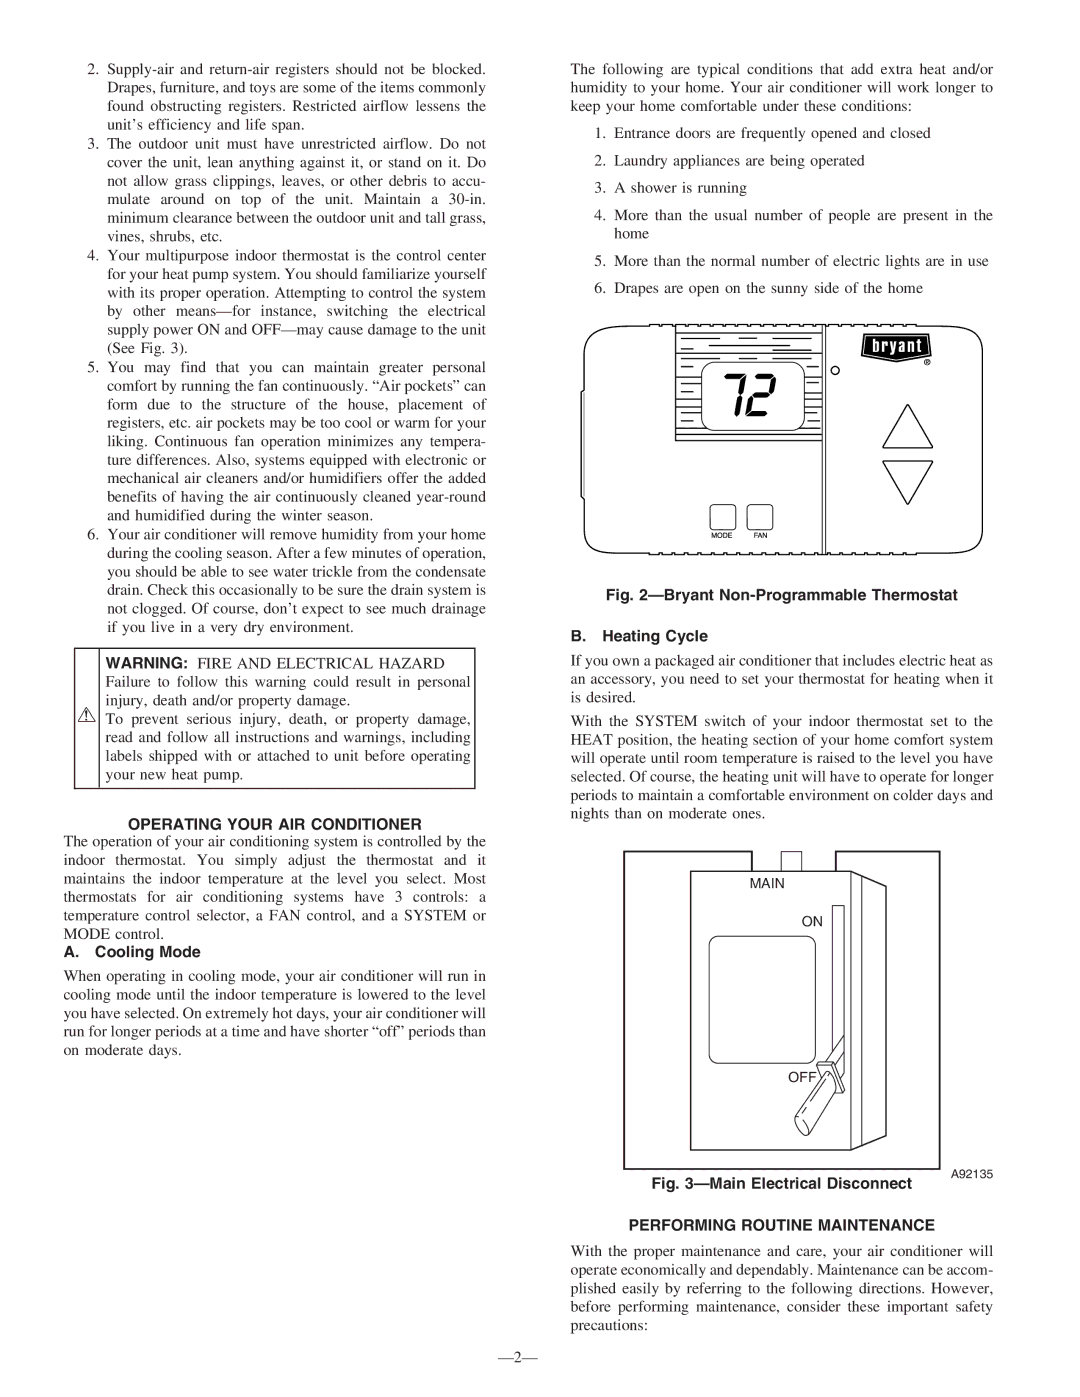 Bryant 564B manual Operating Your AIR Conditioner, Cooling Mode, Performing Routine Maintenance 